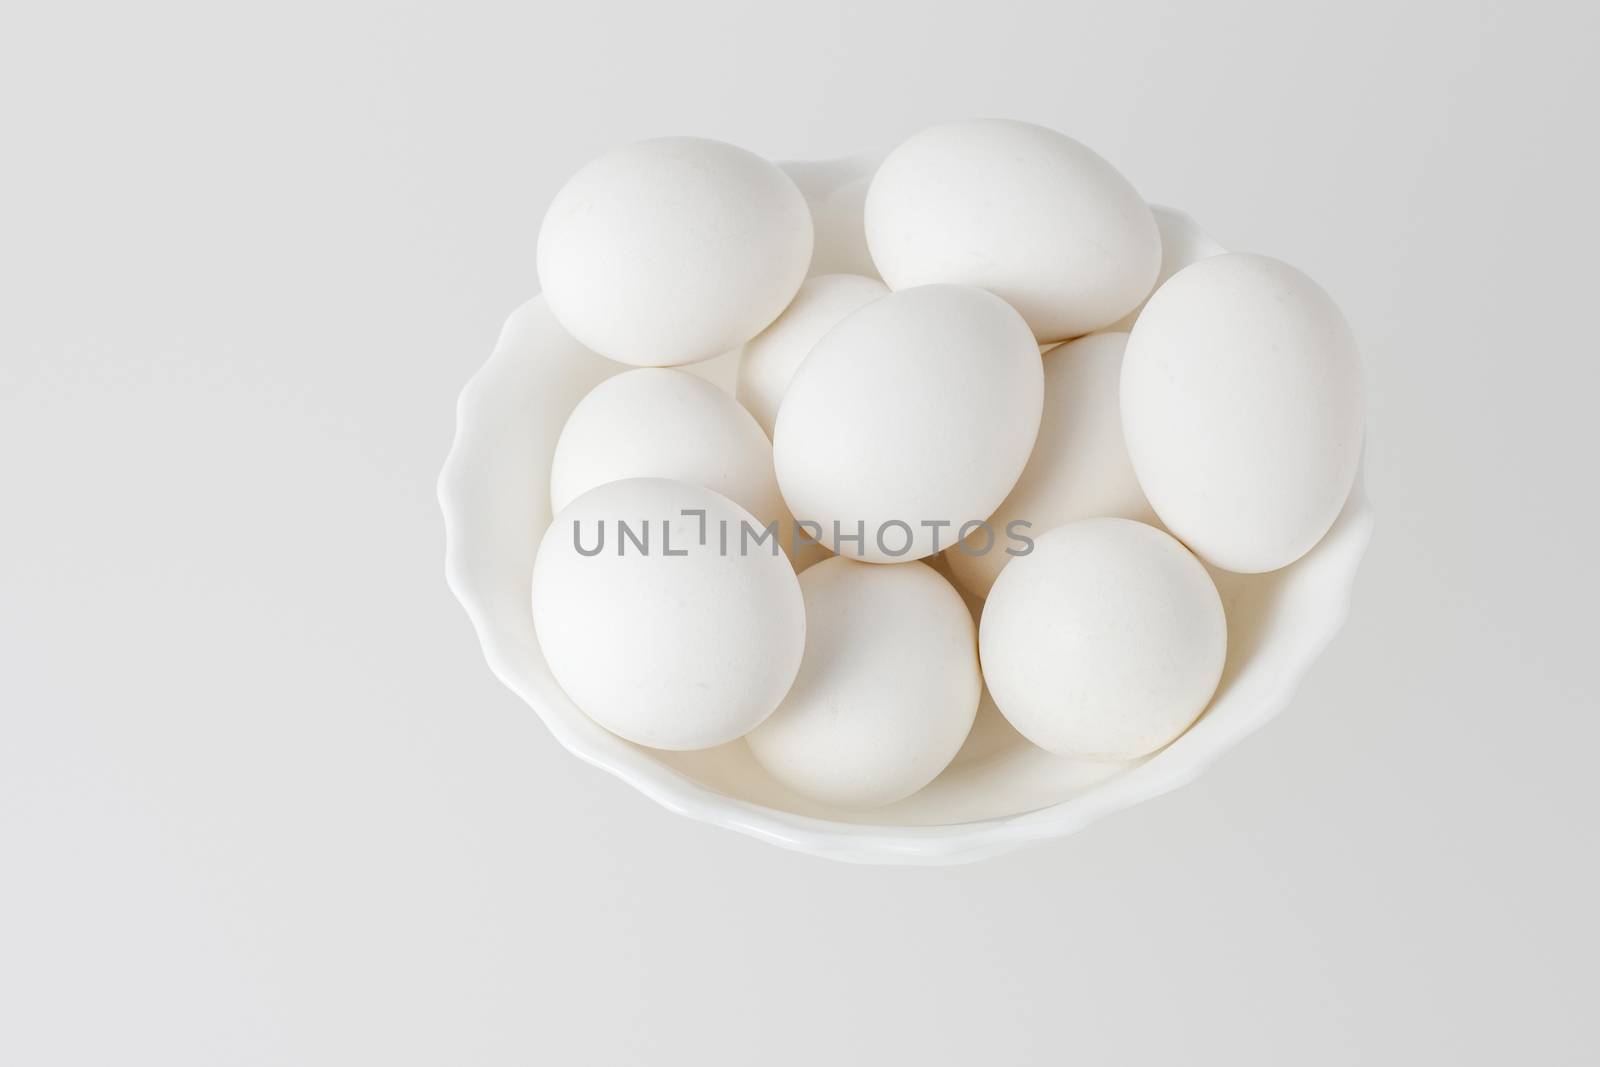 White eggs in a bowl on white background